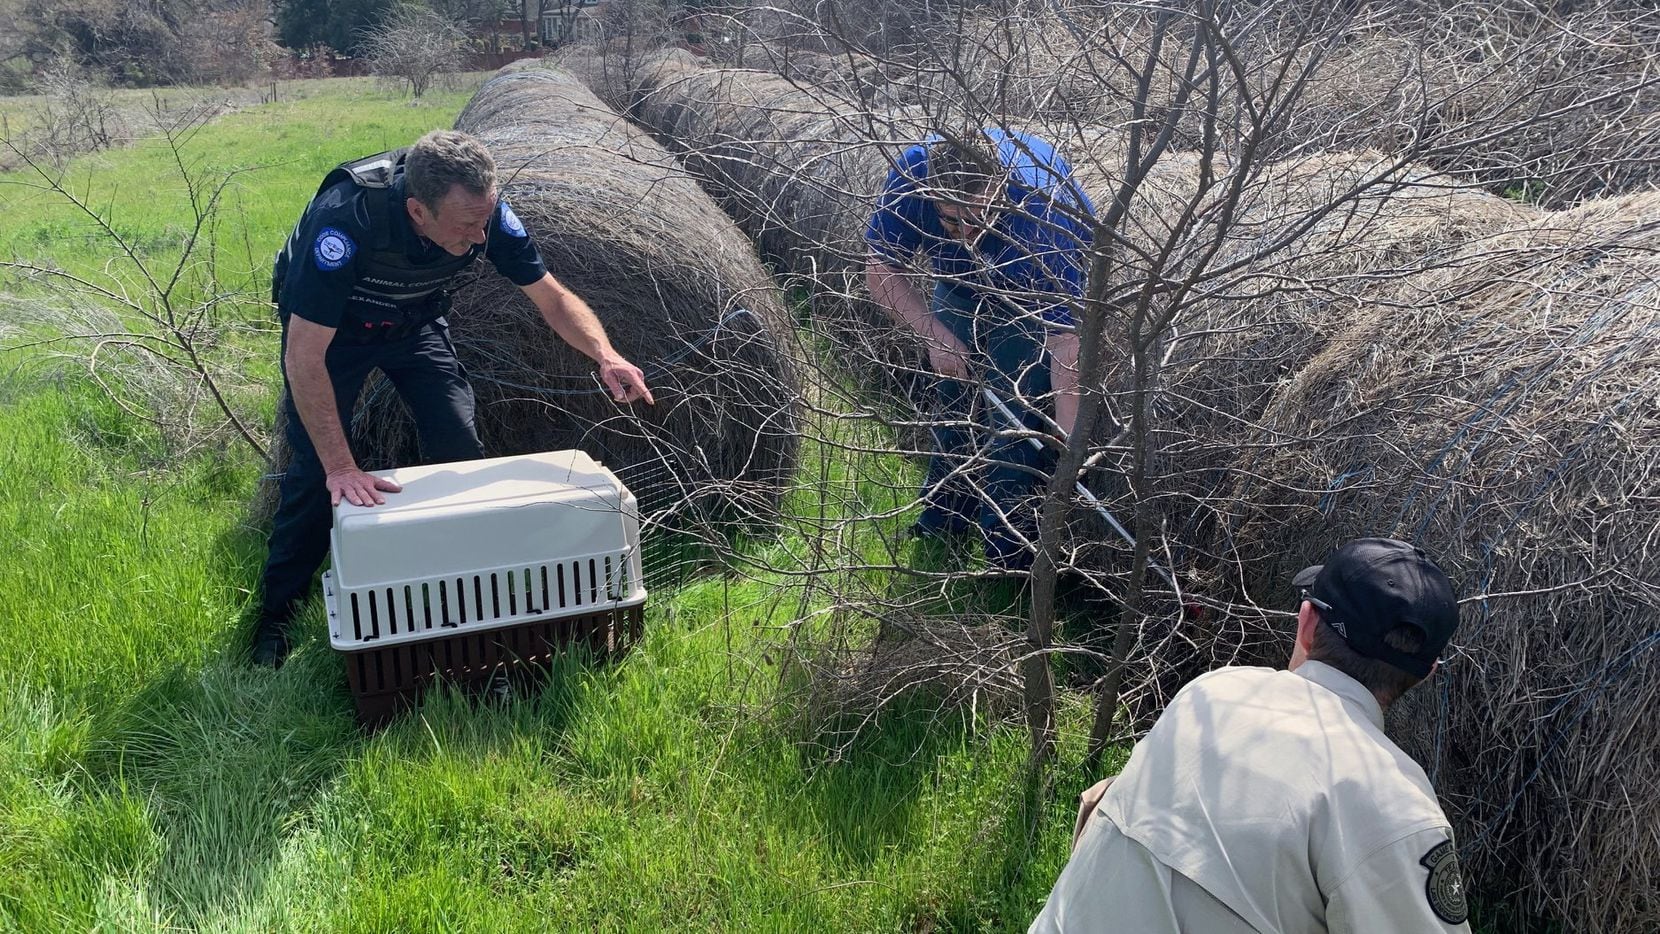 On Feb. 29, Grapevine police located an injured bobcat, which had stepped on an illegal foot...